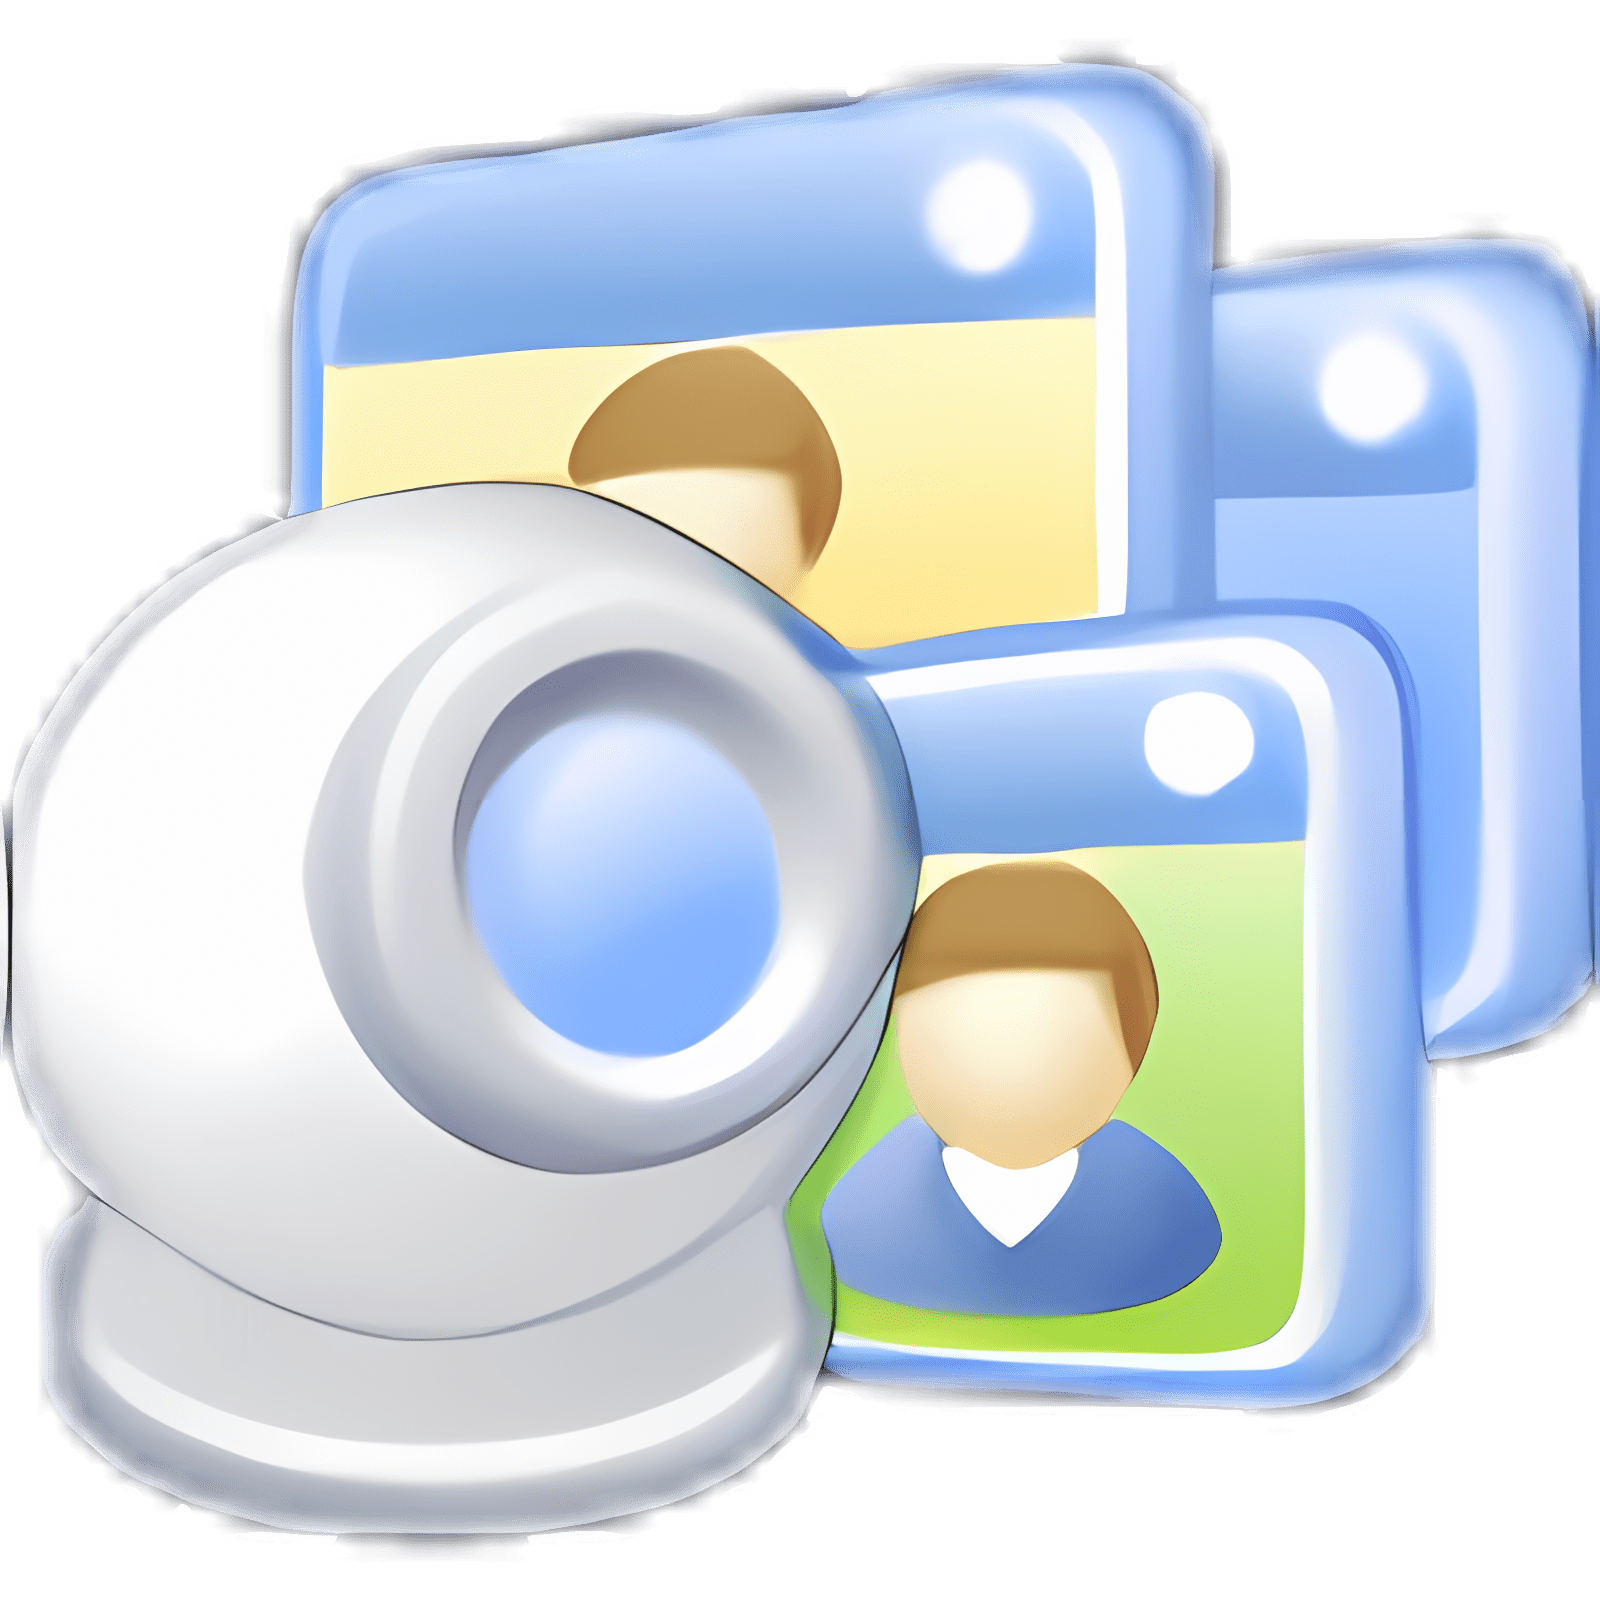 download old version of manycam for mac